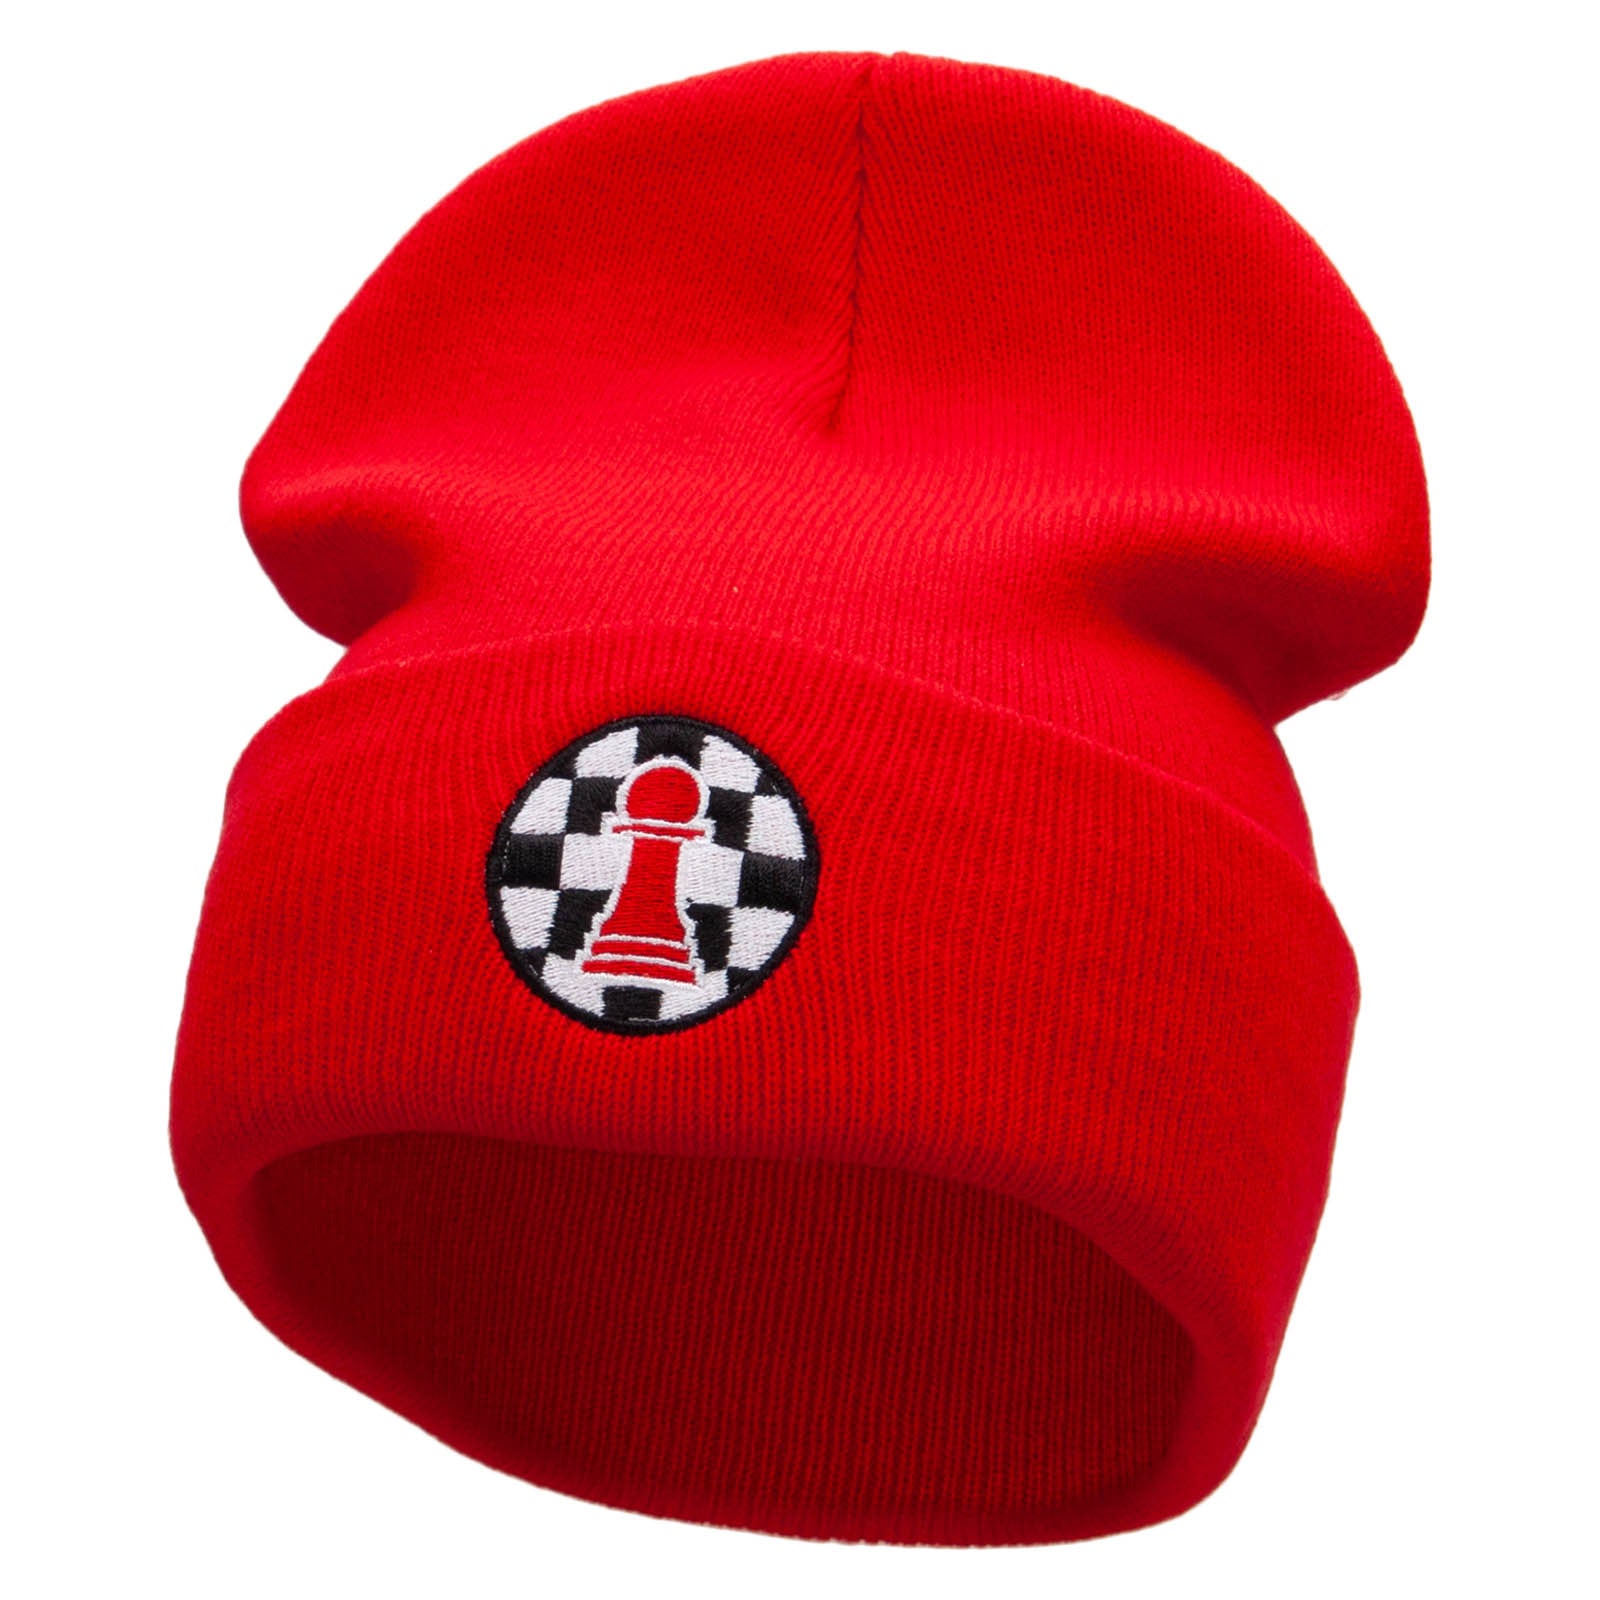 Pawn Chess Piece Embroidered 12 Inch Long Knitted Beanie - Red OSFM